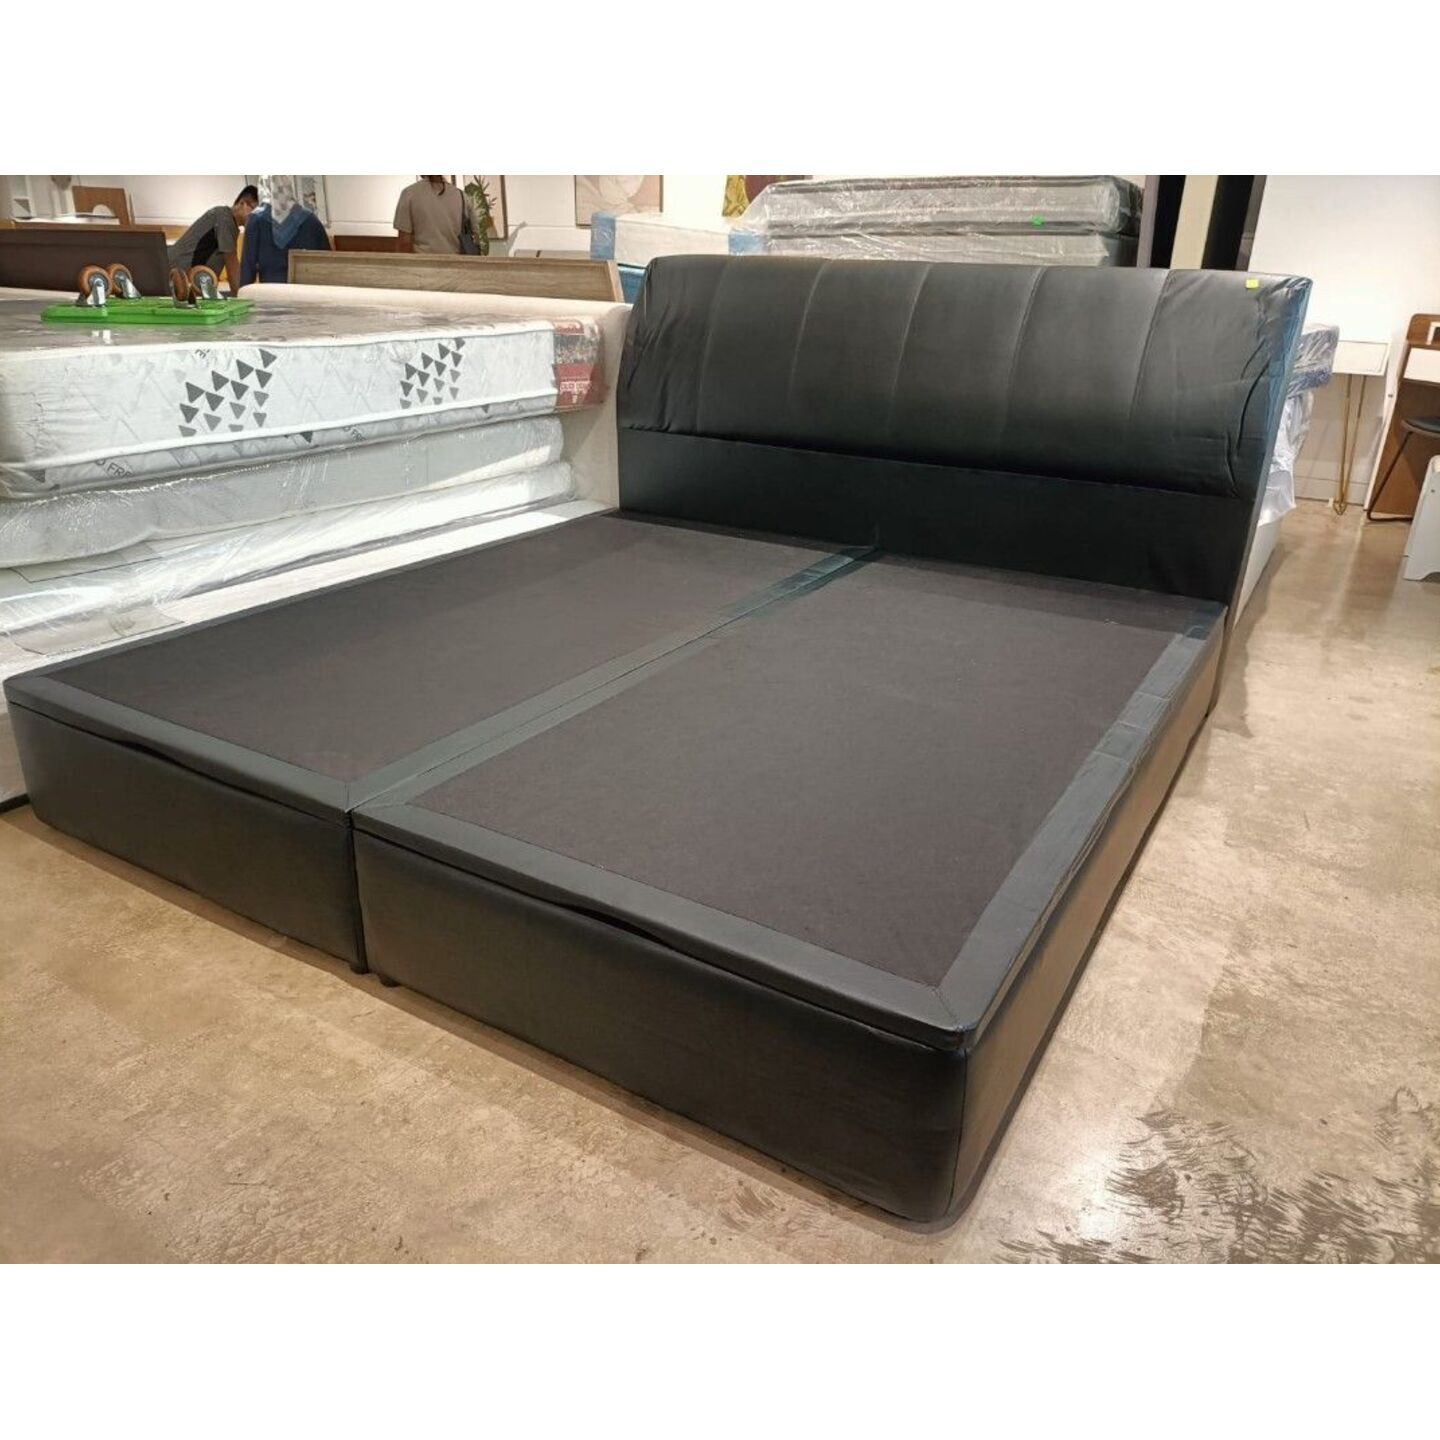 MORGINS Faux Leather King Size Storage Bed in BLACK